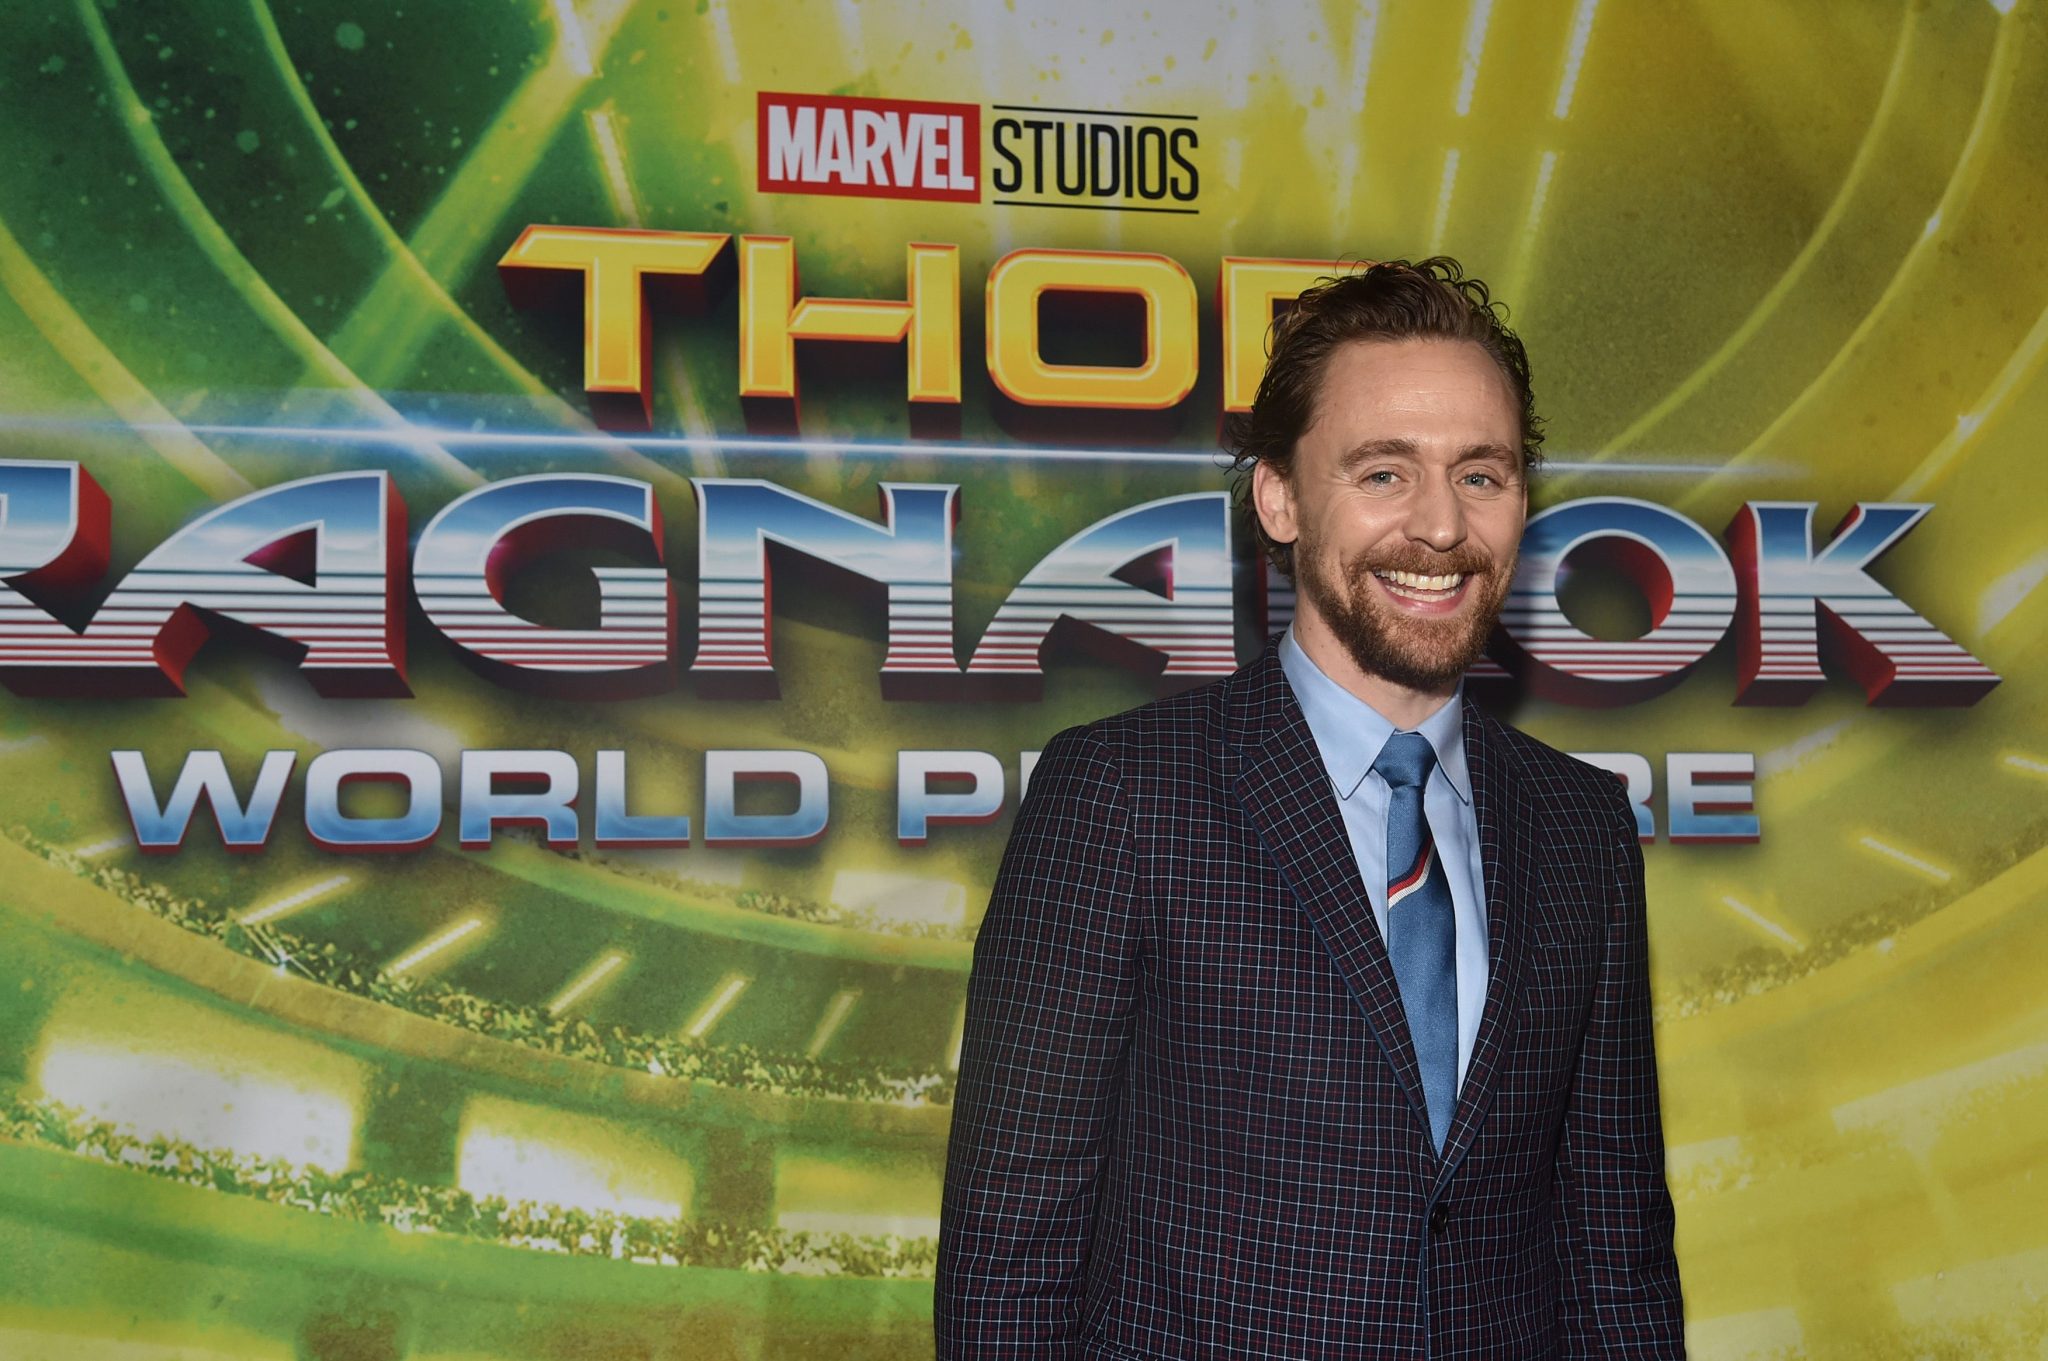 Take a Look At The THOR: RAGNORAK World Premiere!